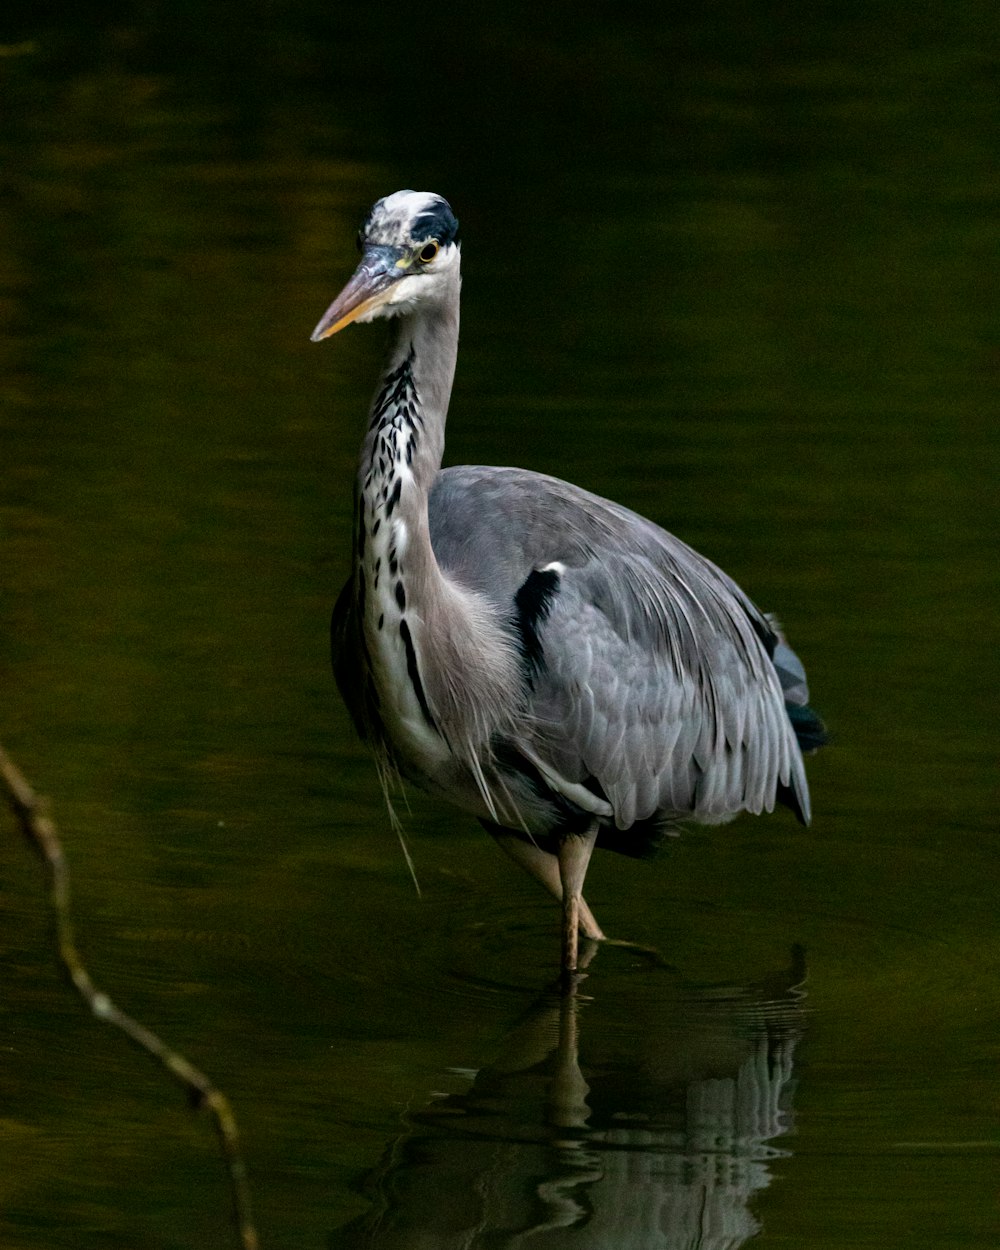 a bird is standing in the water near a branch